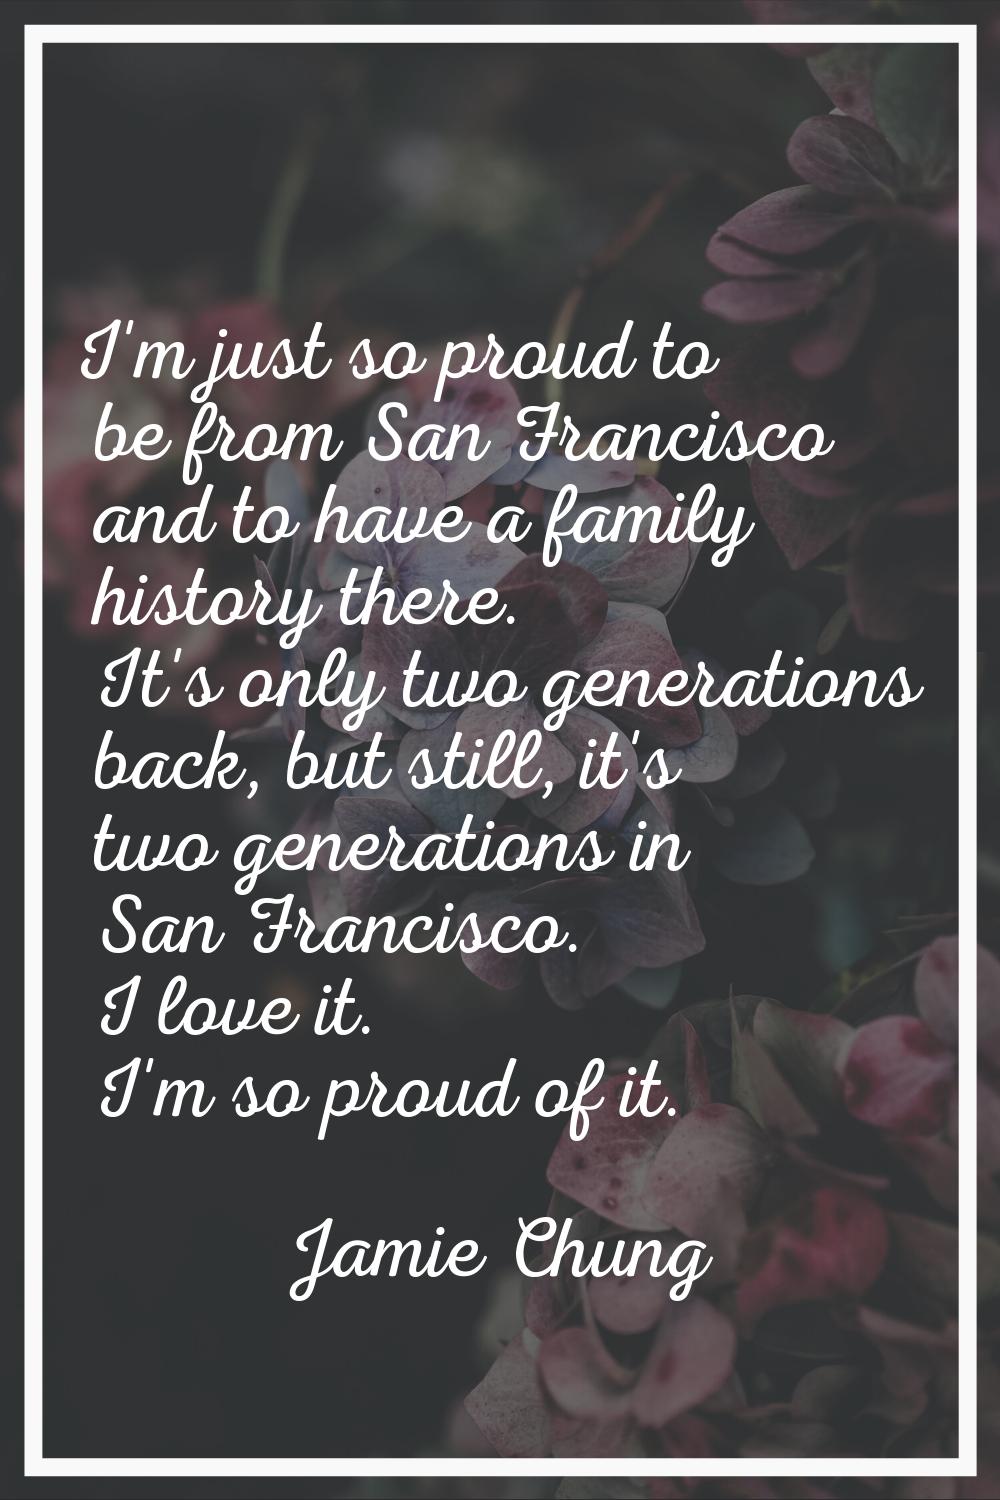 I'm just so proud to be from San Francisco and to have a family history there. It's only two genera